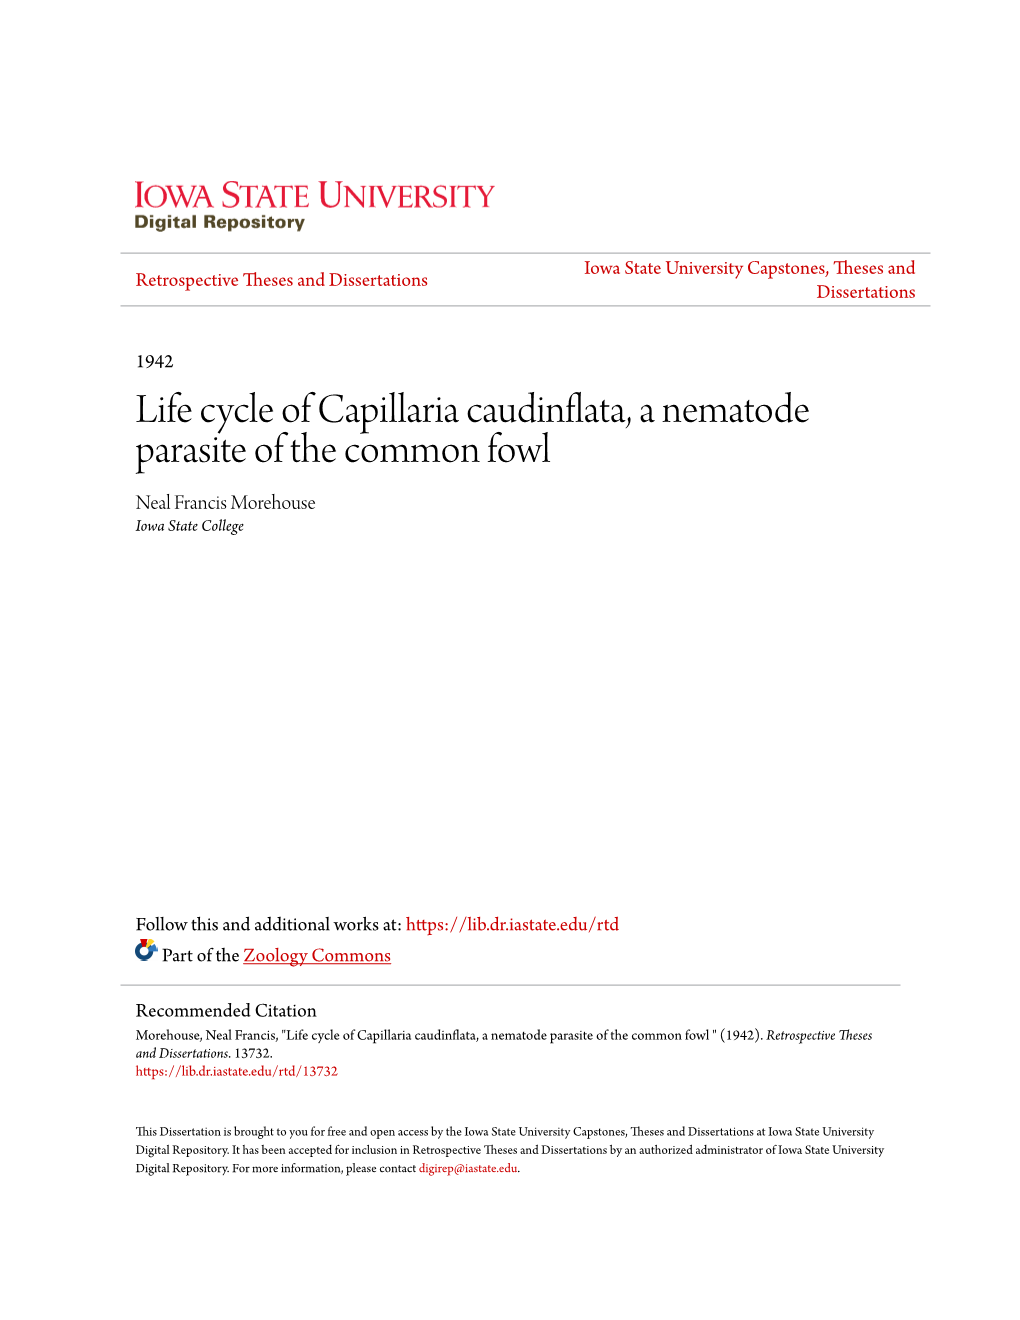 Life Cycle of Capillaria Caudinflata, a Nematode Parasite of the Common Fowl Neal Francis Morehouse Iowa State College